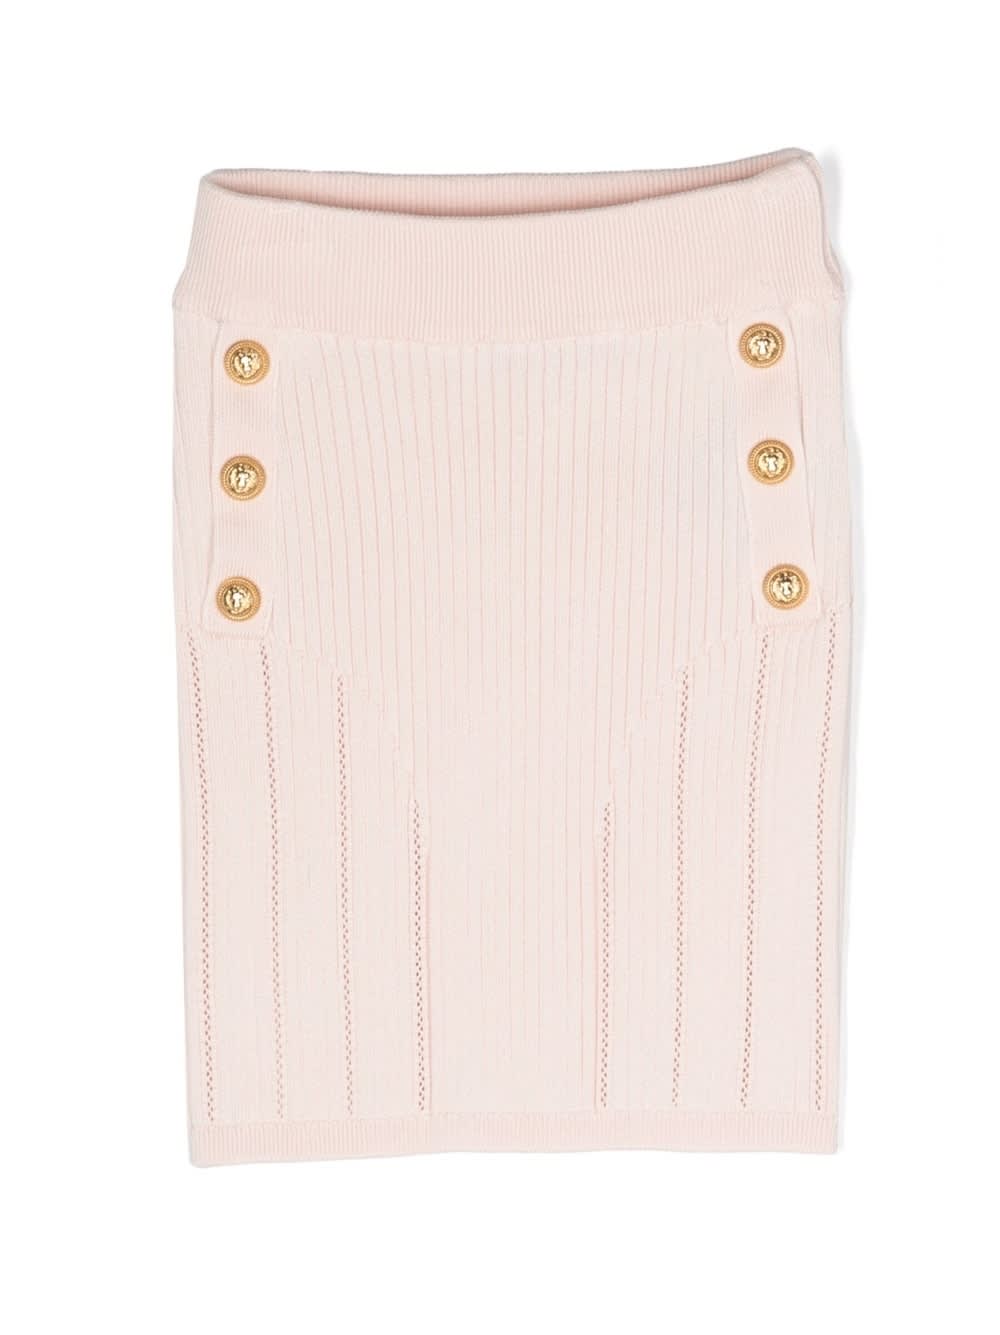 Balmain Kids' Skirt With Application In Pink